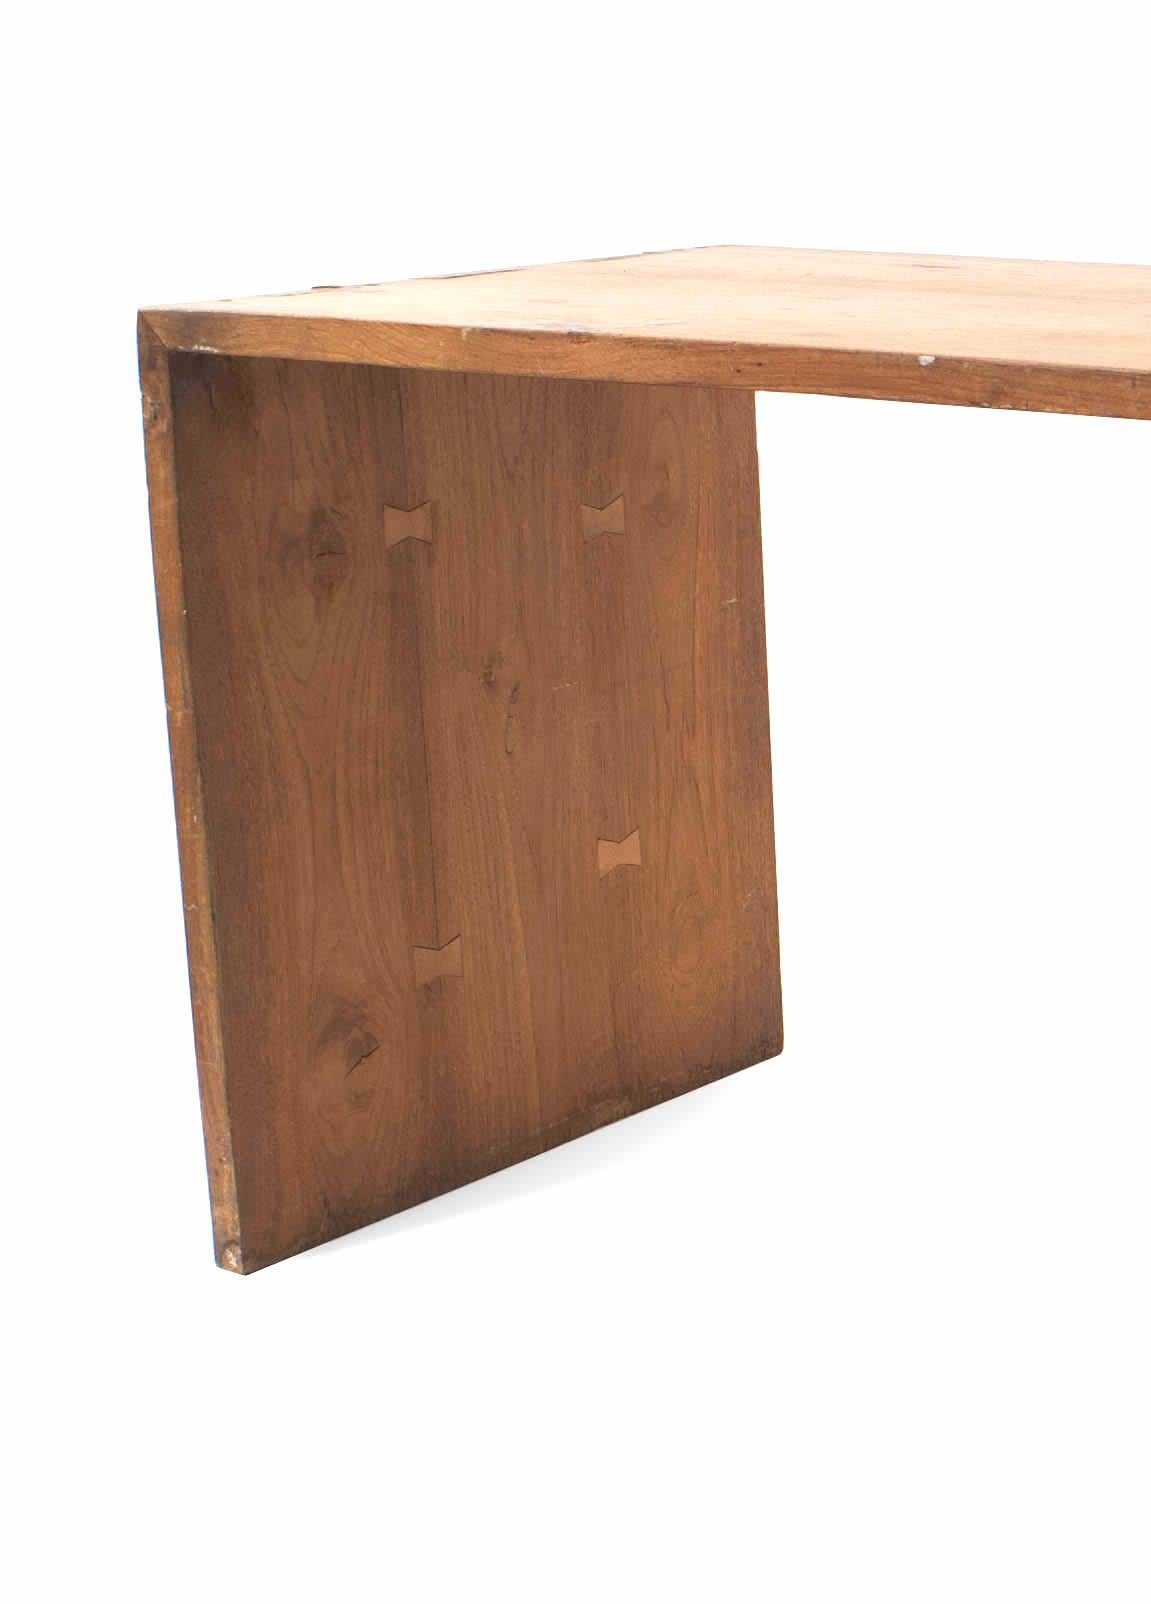 Country Post War Minimalist Pine Table Desk with Exposed Dovetails